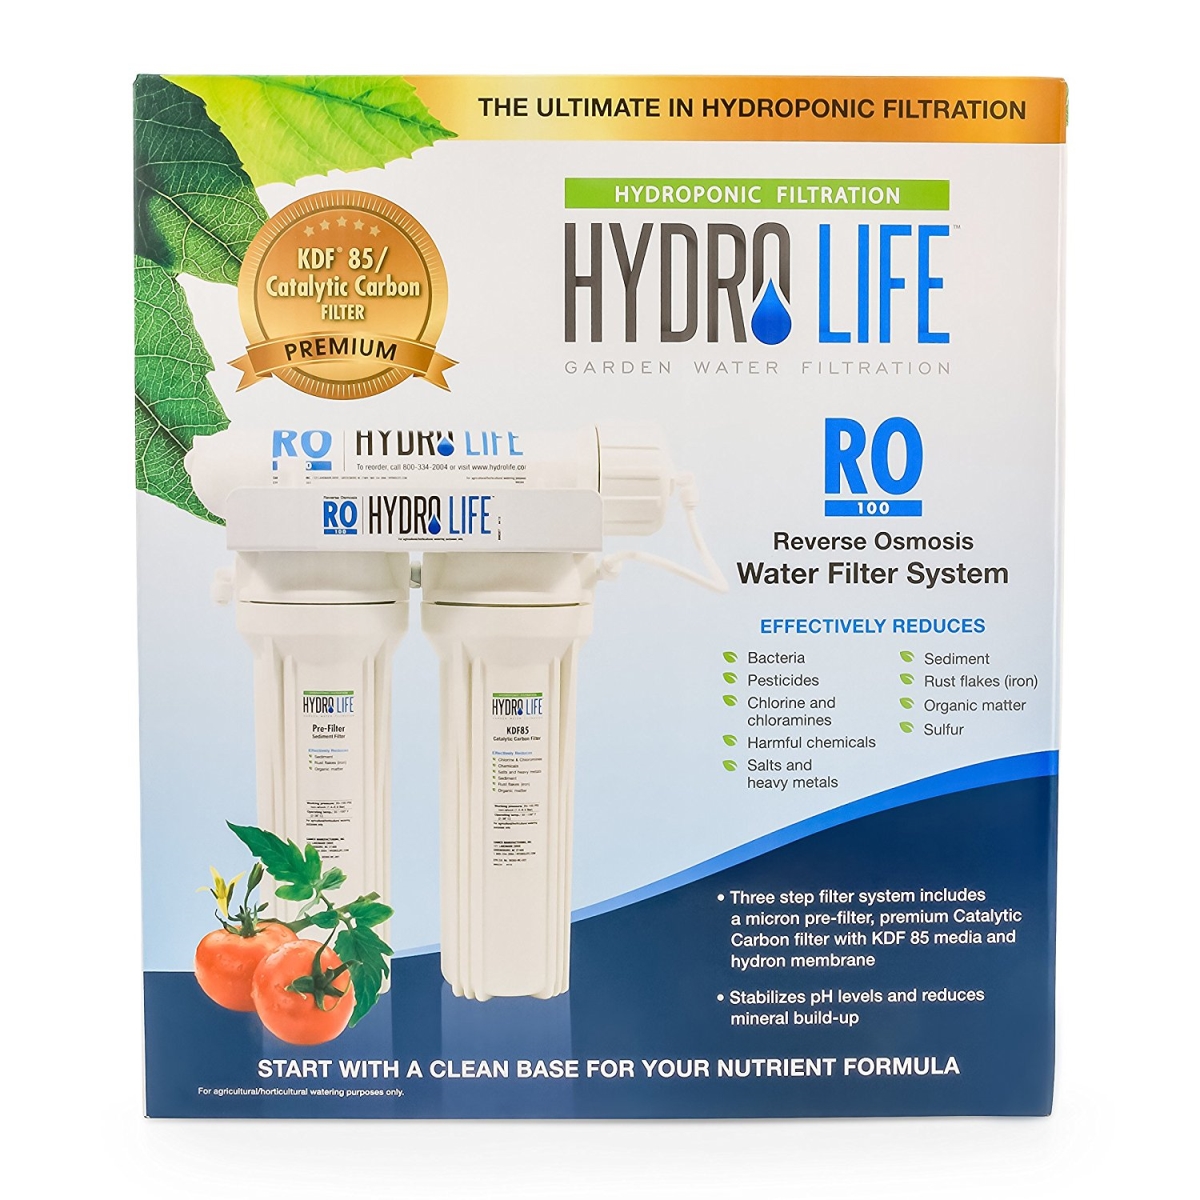 52715 Hydro Life Hydroponics & Reverse Osmosis Twin Filtration System